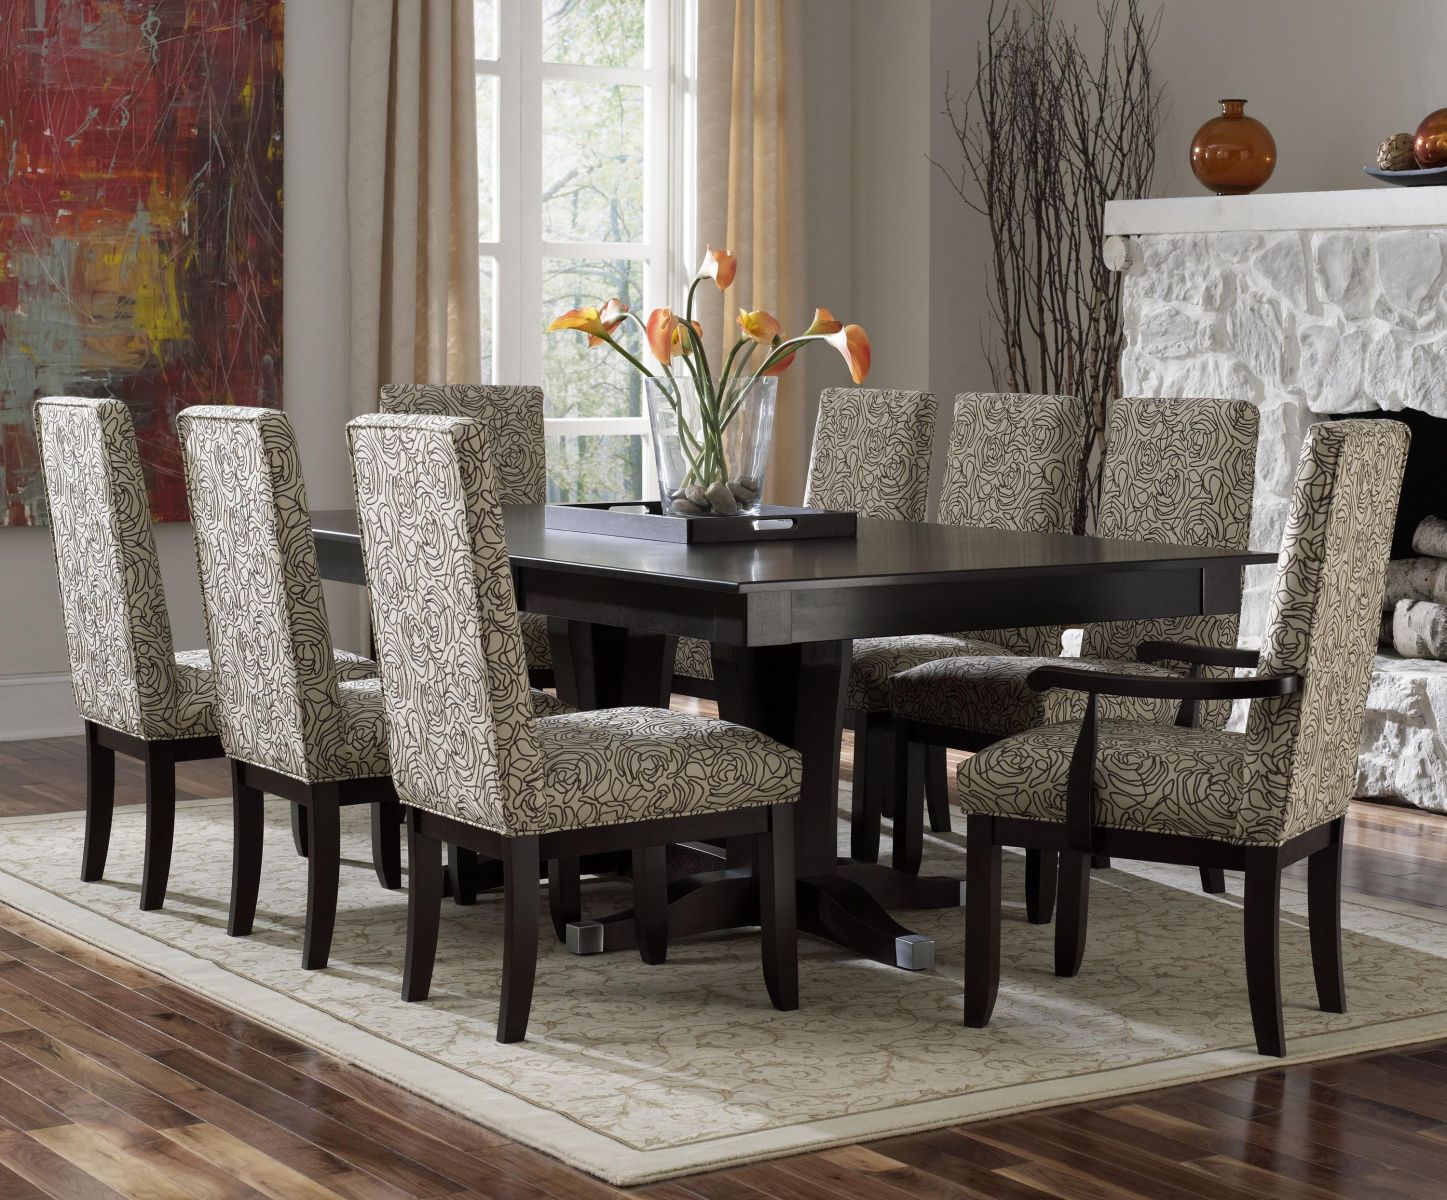 Brown Dining With Beautiful Brown Dining Room Set With Floral Chairs Around Black Table Near Stoned Fireplace Dining Room Various Dining Room Sets For Your Comfortable Meal Time